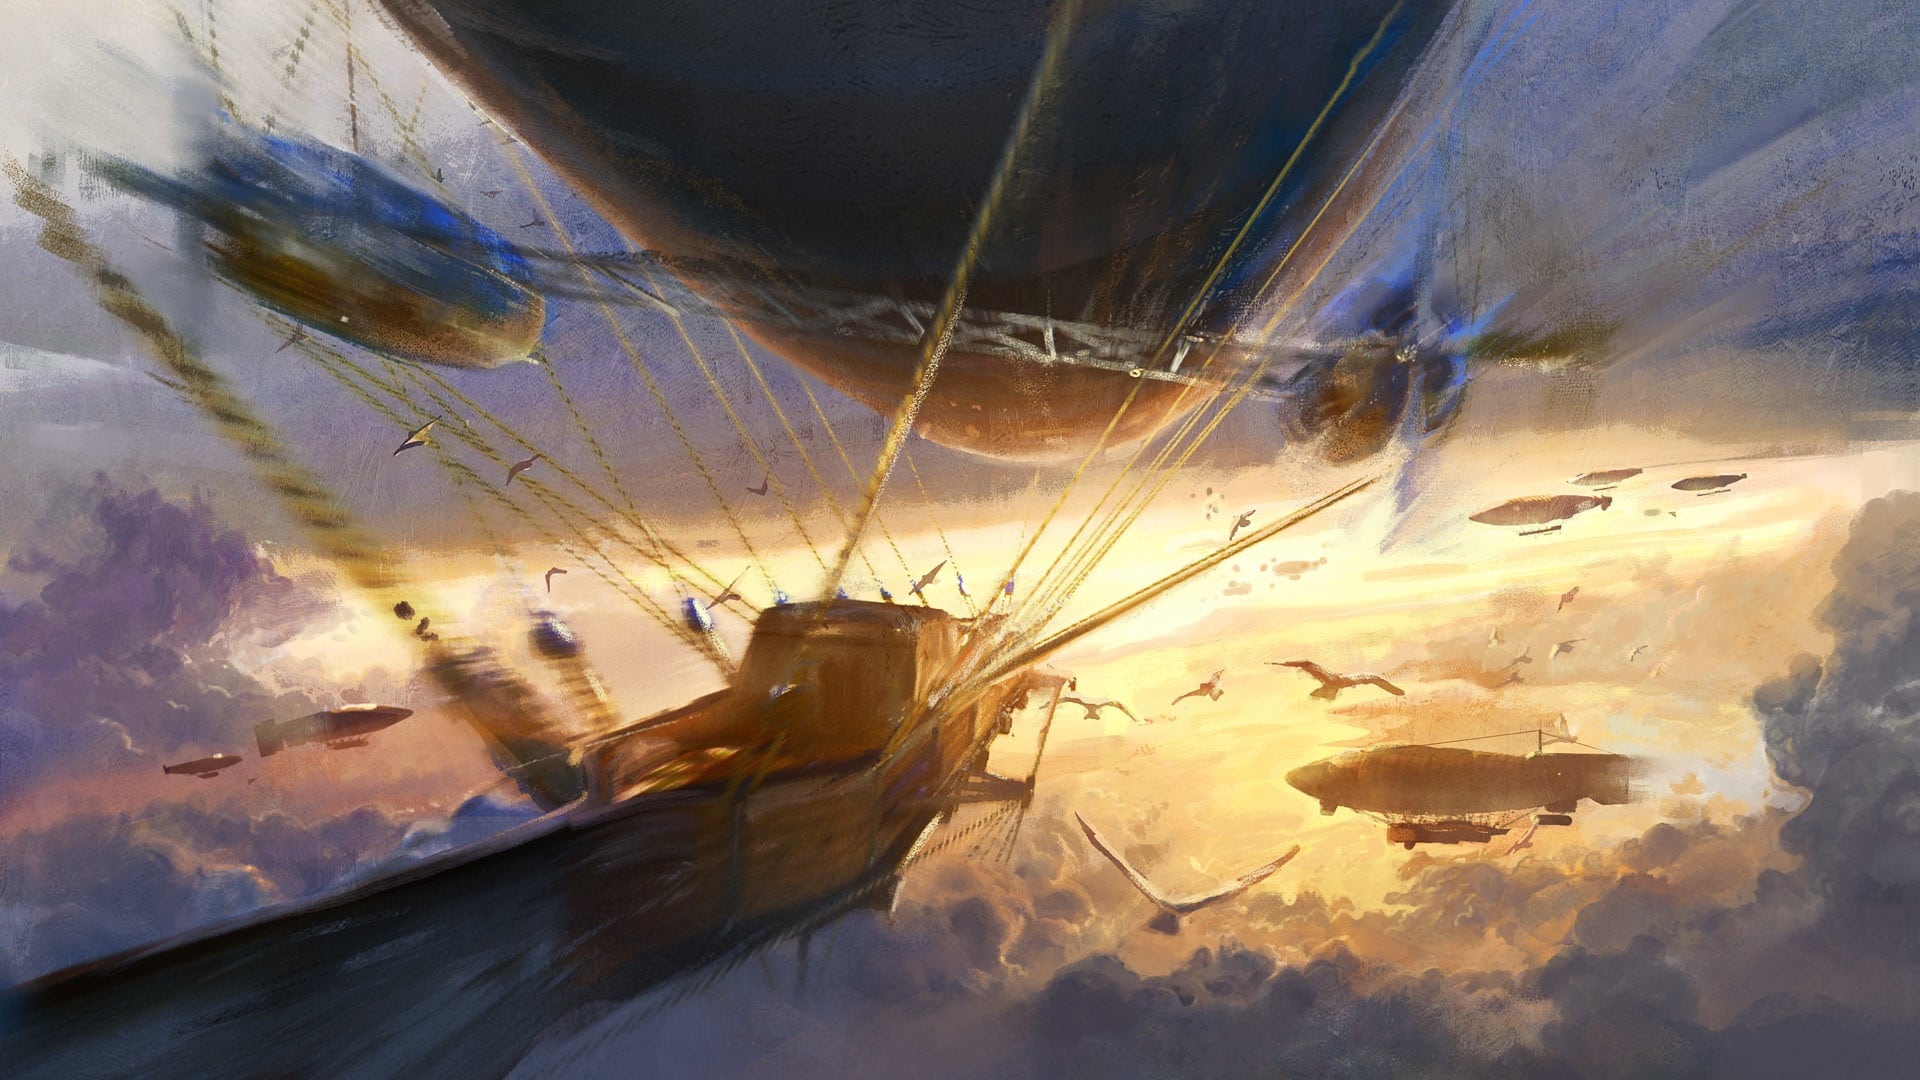 Soon we will witness airships fighting each other in Anno 1800.